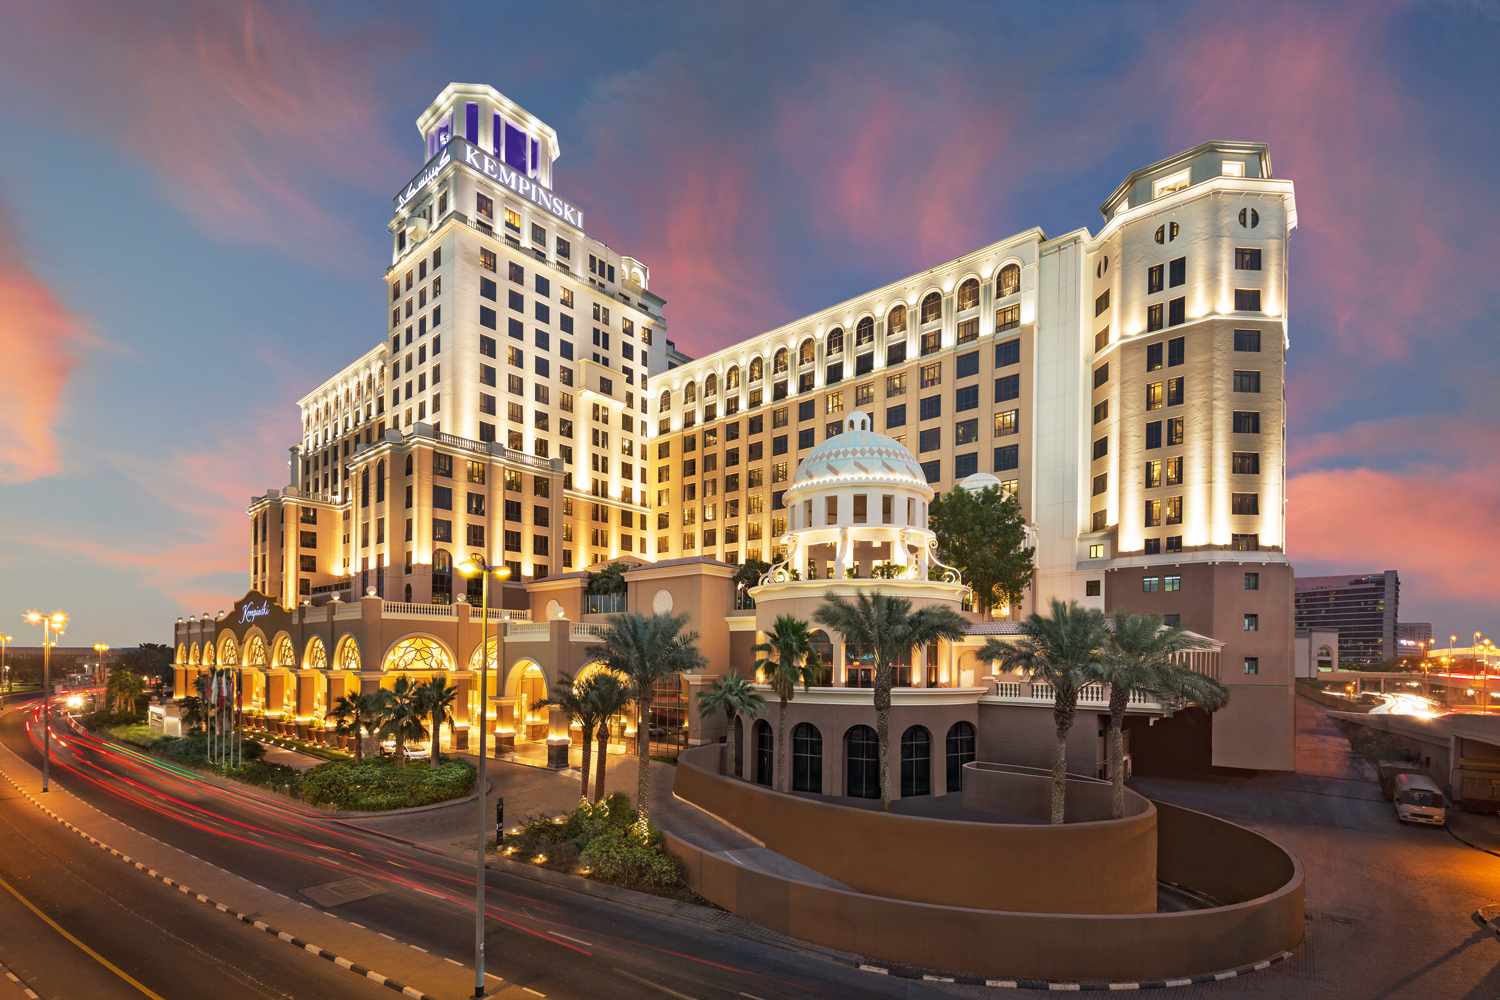 Free Ski Dubai tickets with a staycation at Kempinski Hotel Mall of the